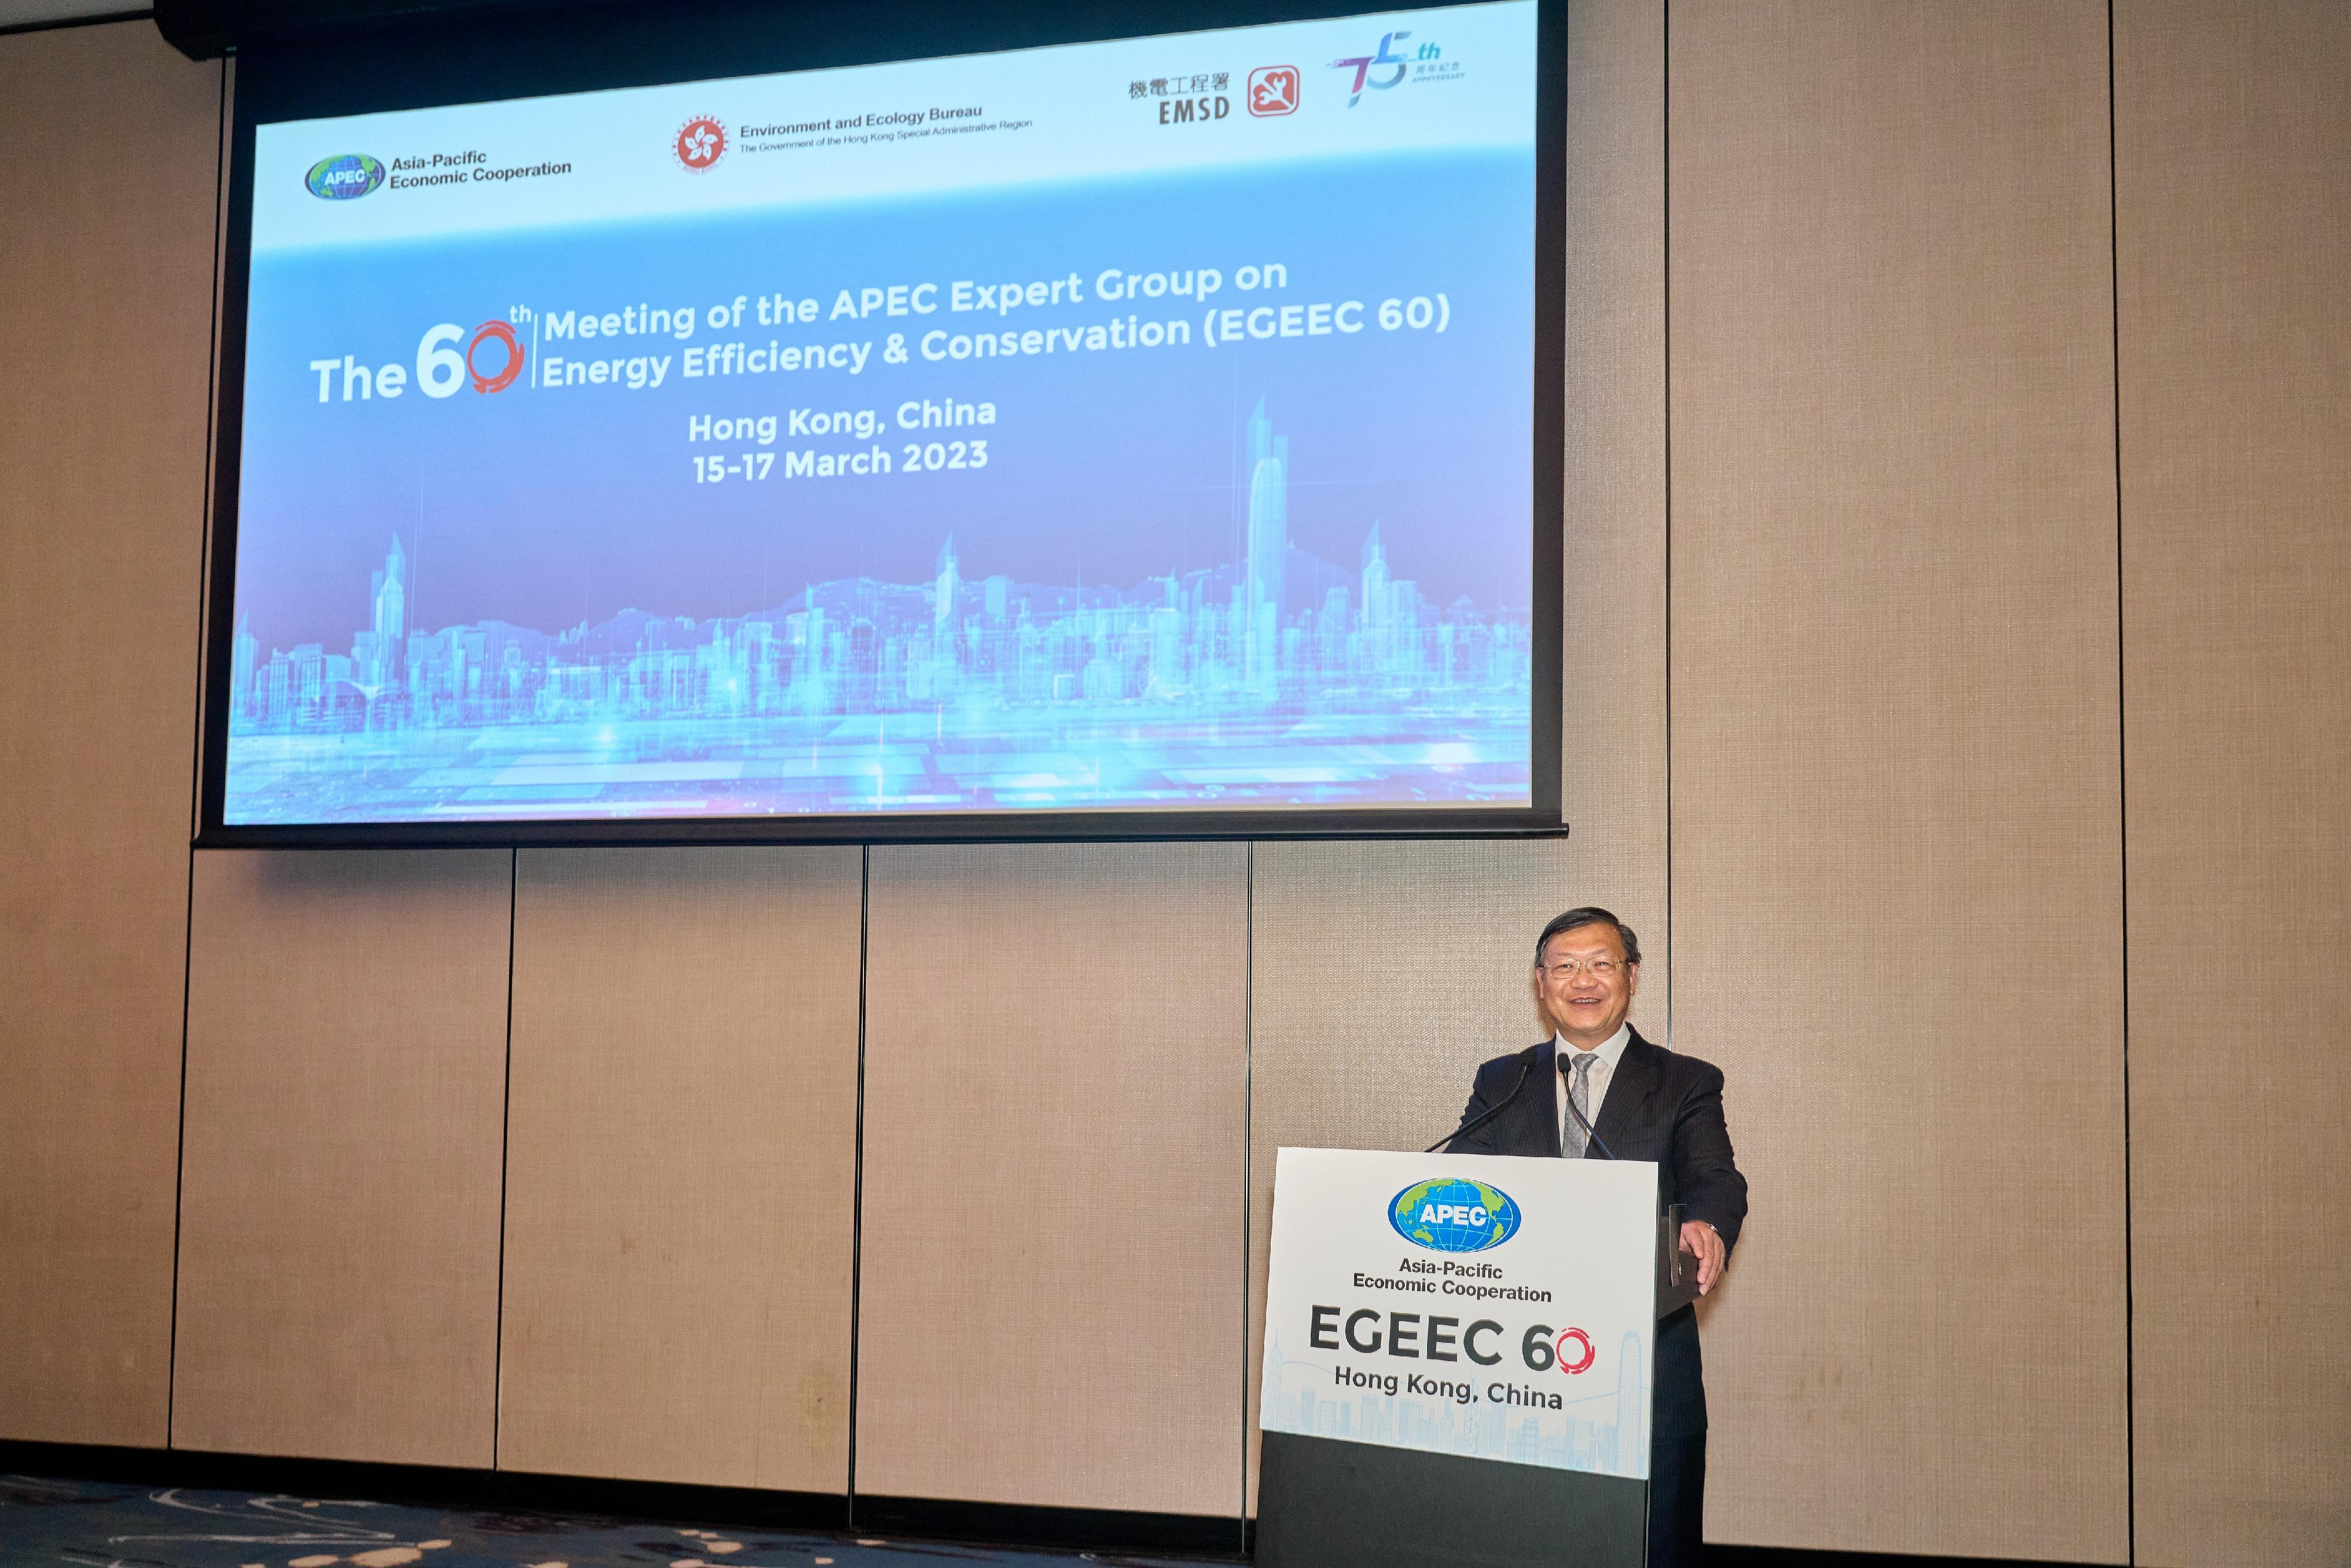 Held in Hong Kong in hybrid mode, the 60th Meeting of Expert Group on Energy Efficiency and Conservation of the Asia-Pacific Economic Cooperation concluded today (March 16). Photo shows the Director of Electrical and Mechanical Services, Mr Pang Yiu-hung, delivering the closing remarks.